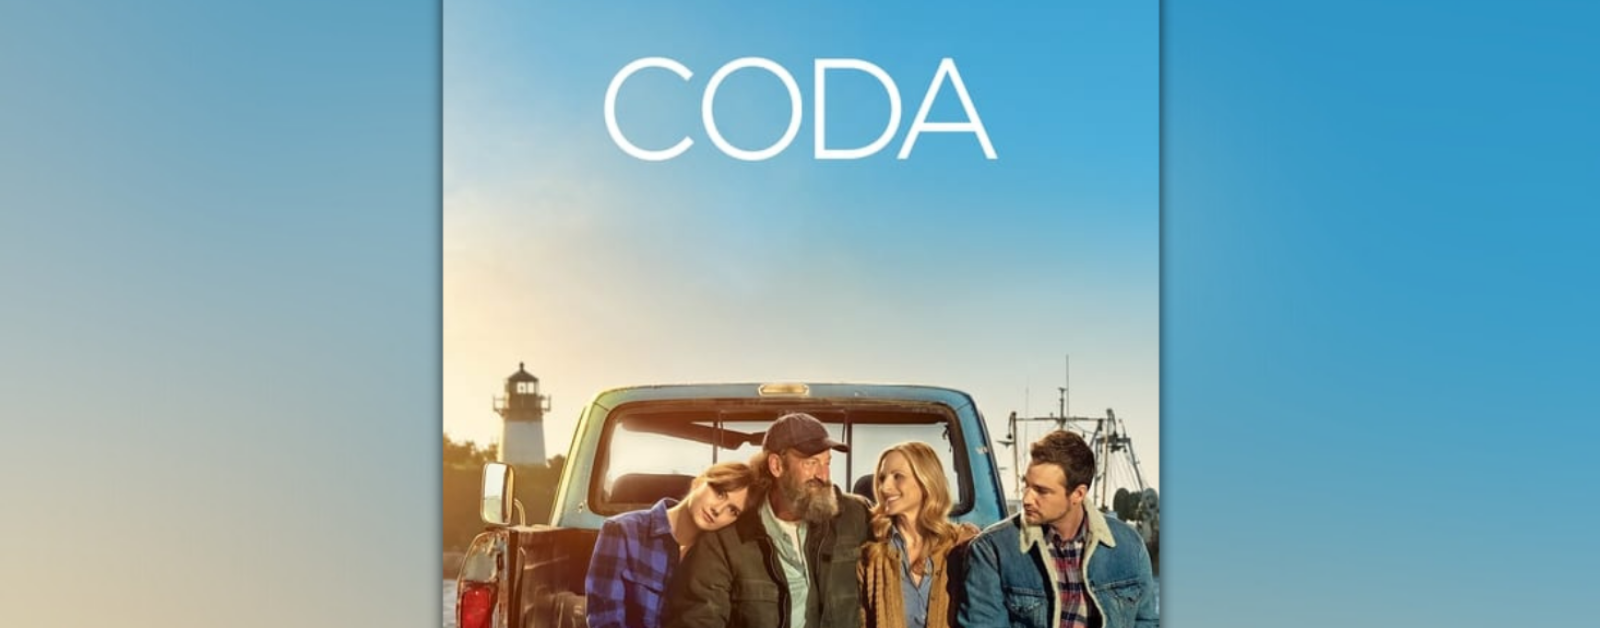 blue graphic with the cover photo of the movie CODA